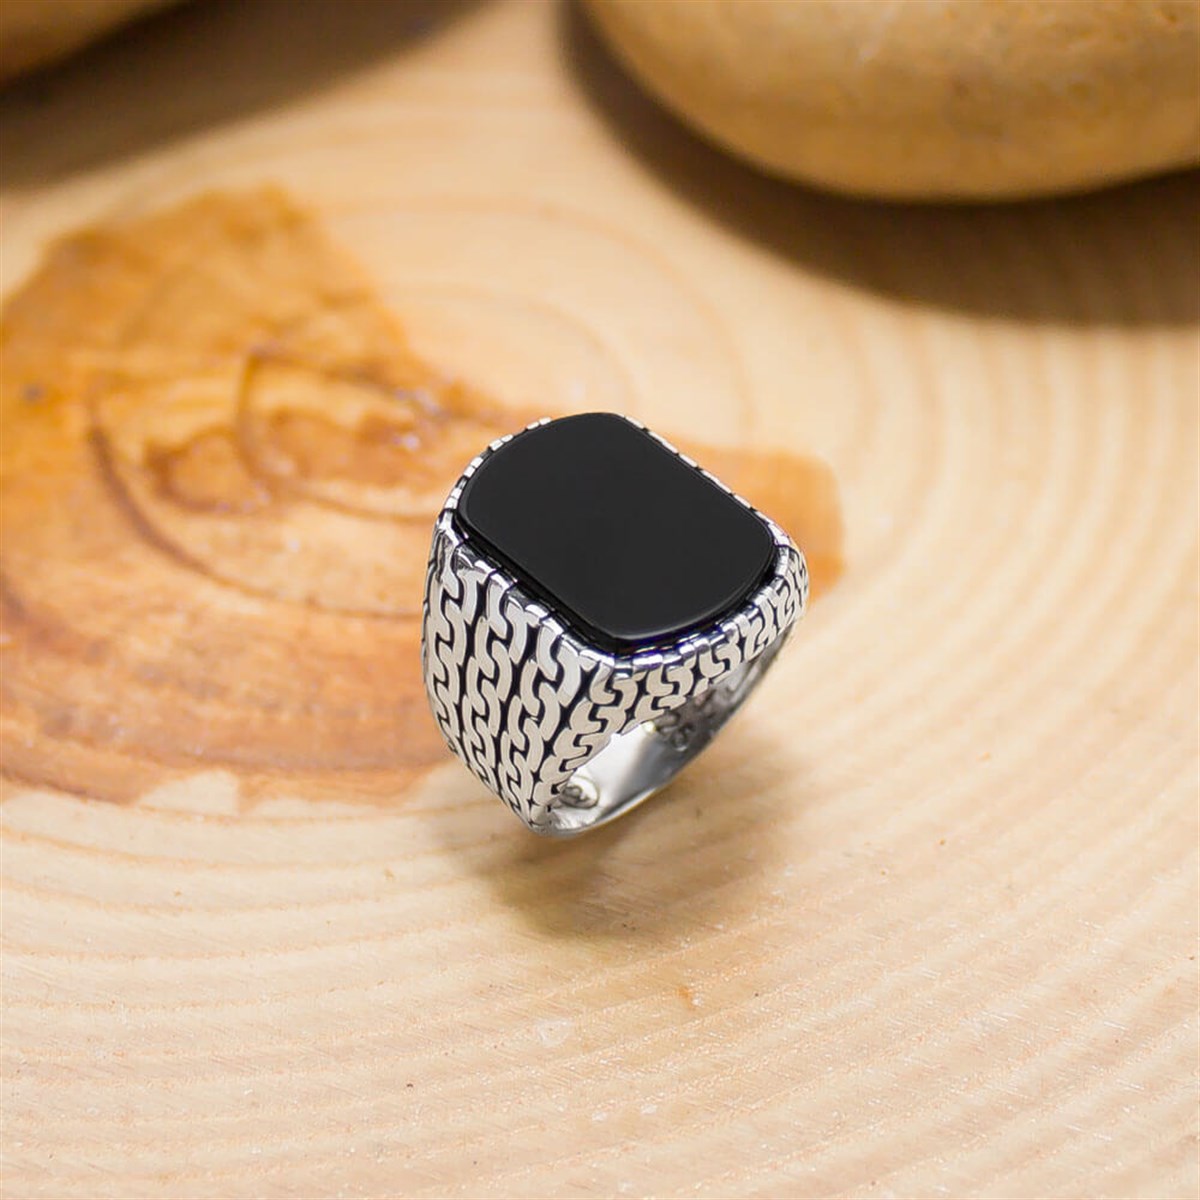 Black Onix Stone Side Embroidered Sterling Silver Men's Ring